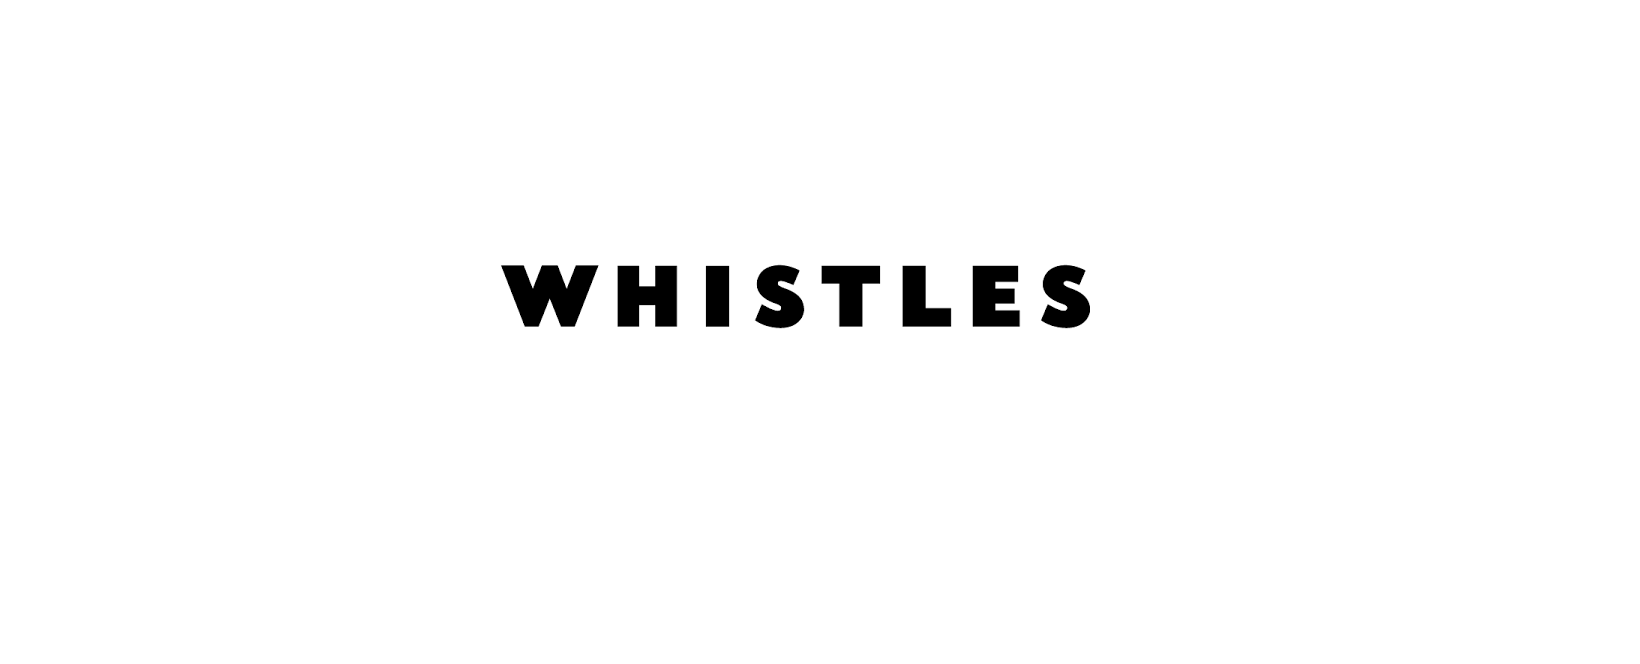 Whistle Discount Code 2022